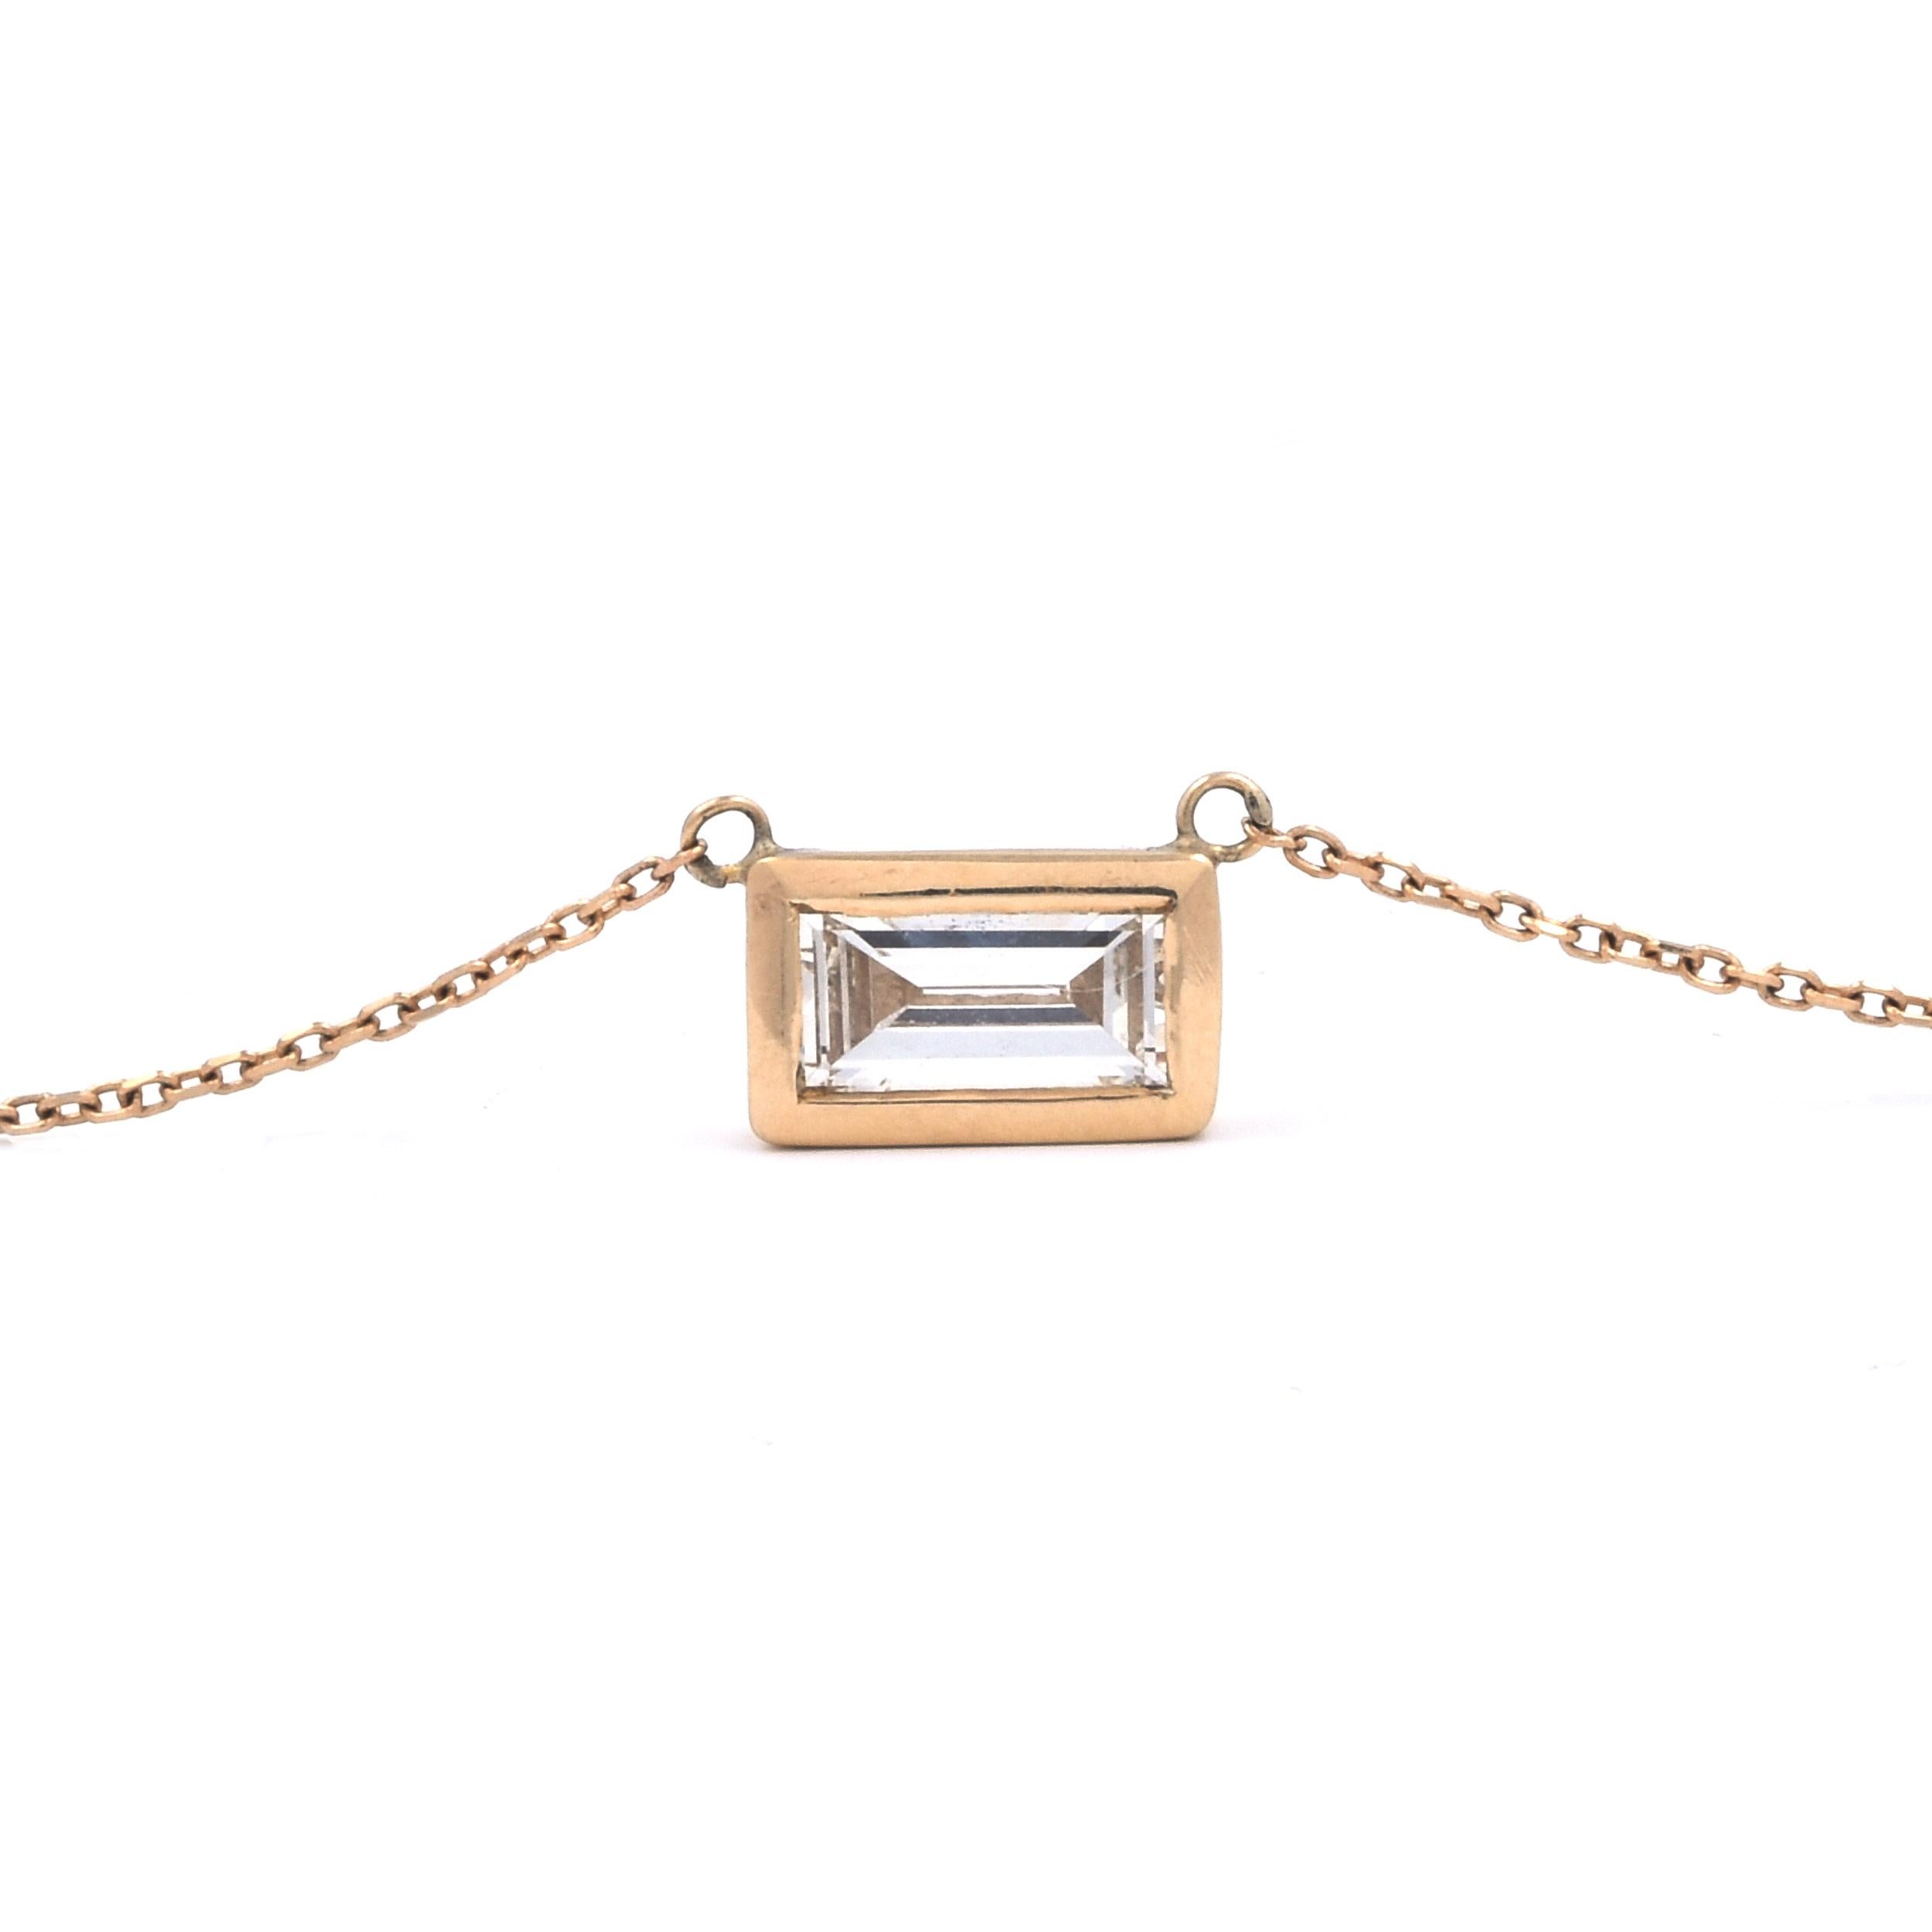 Designer: custom
Material: 14K yellow gold
Diamonds: 1 emerald cut = 1.00ct
Color: G
Clarity: SI1
Dimensions: necklace measures 20-inches
Weight: 2.46 grams
